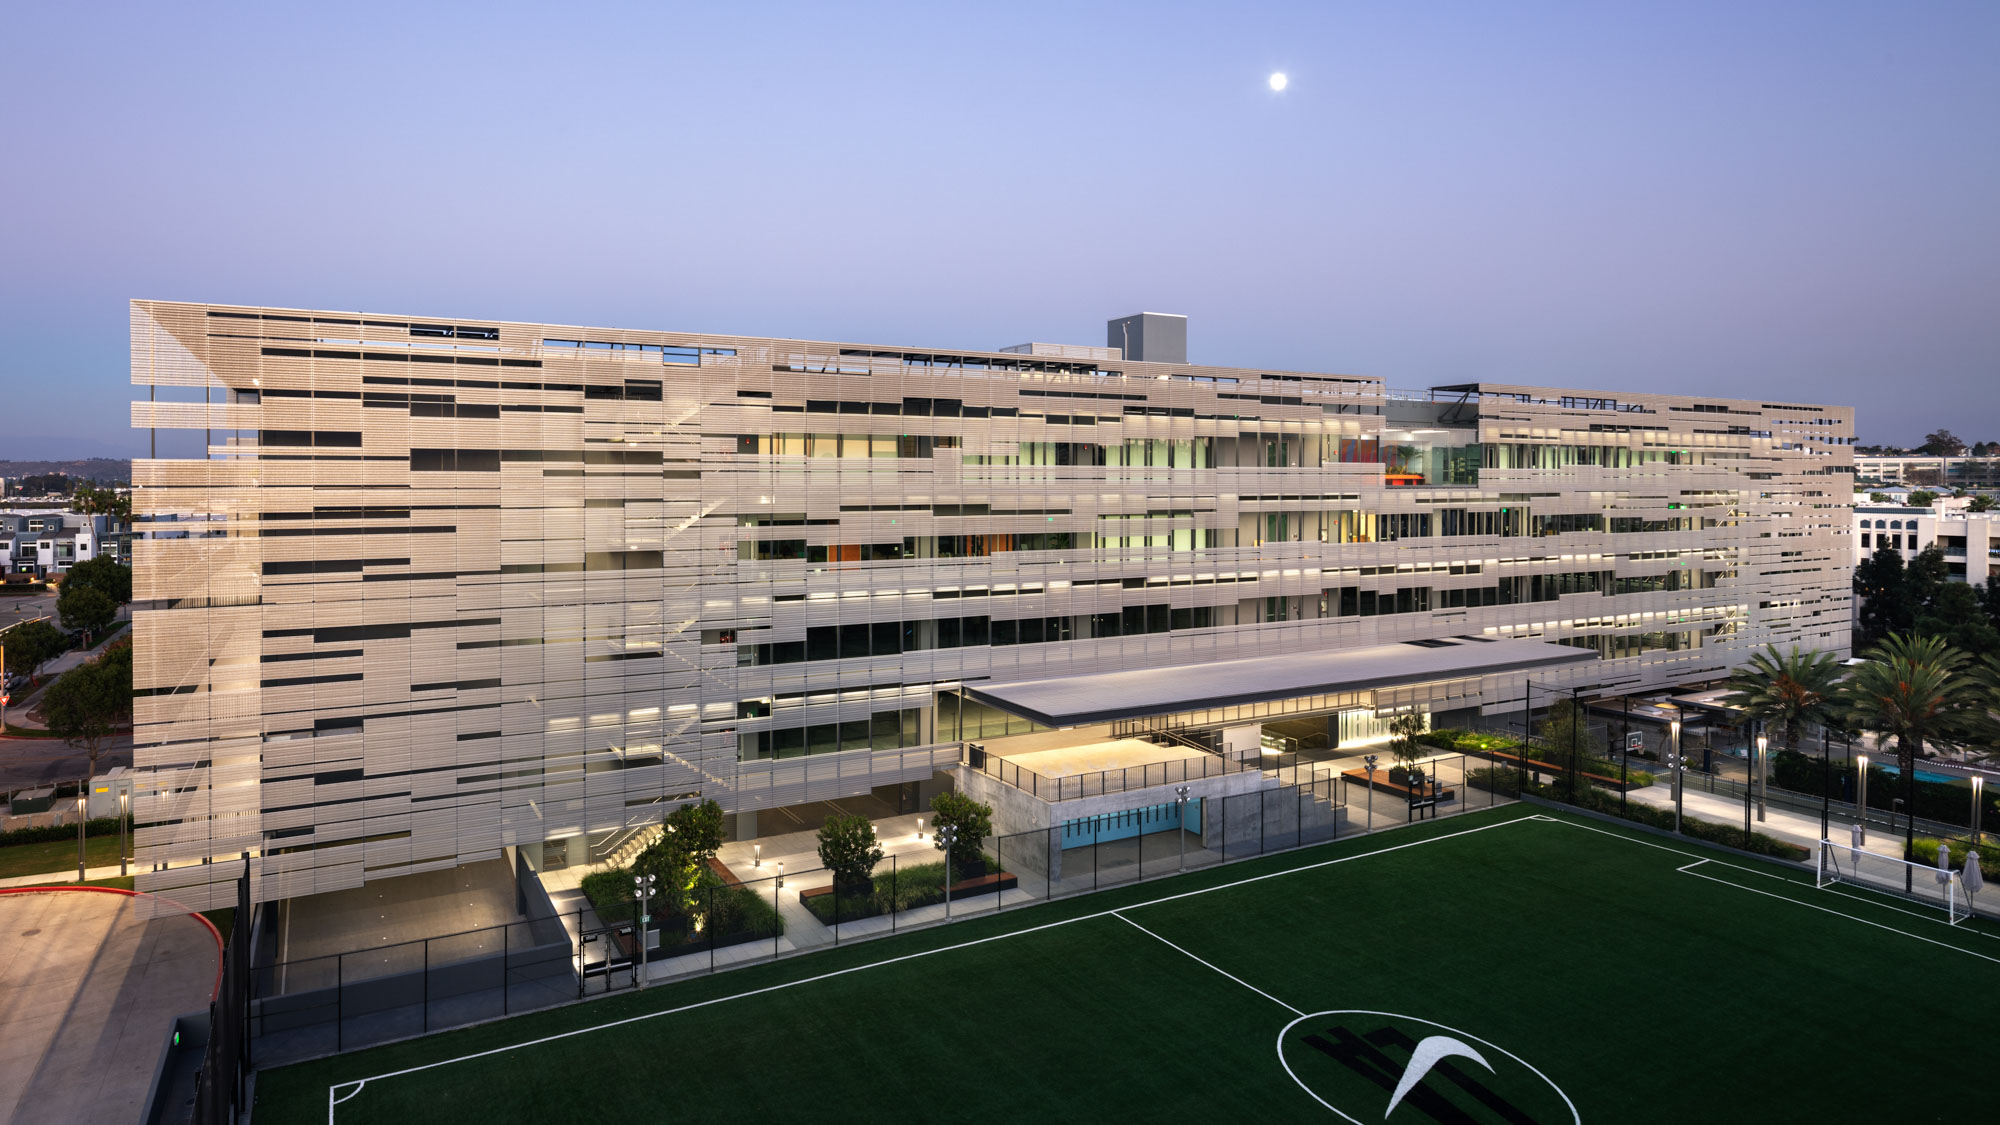 WE3, designed by SPF:a, is the third building to land at the Water’s Edge creativity complex in Playa Vista, California (Mike Kelley)